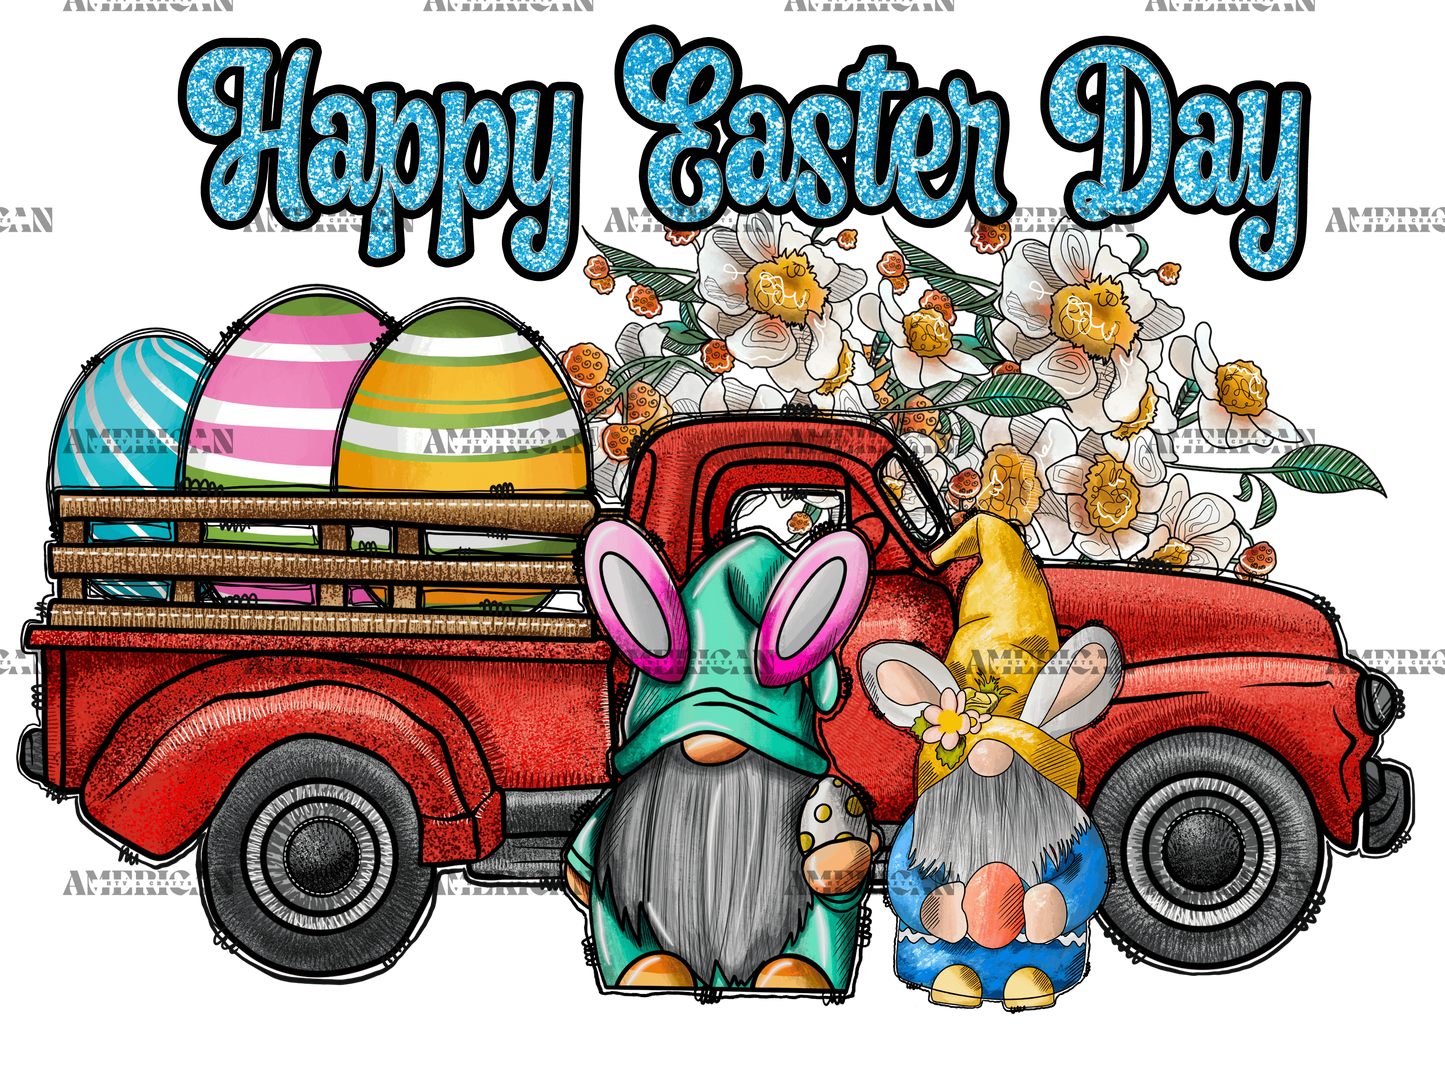 Happy Easter Day Red Truck DTF Transfer